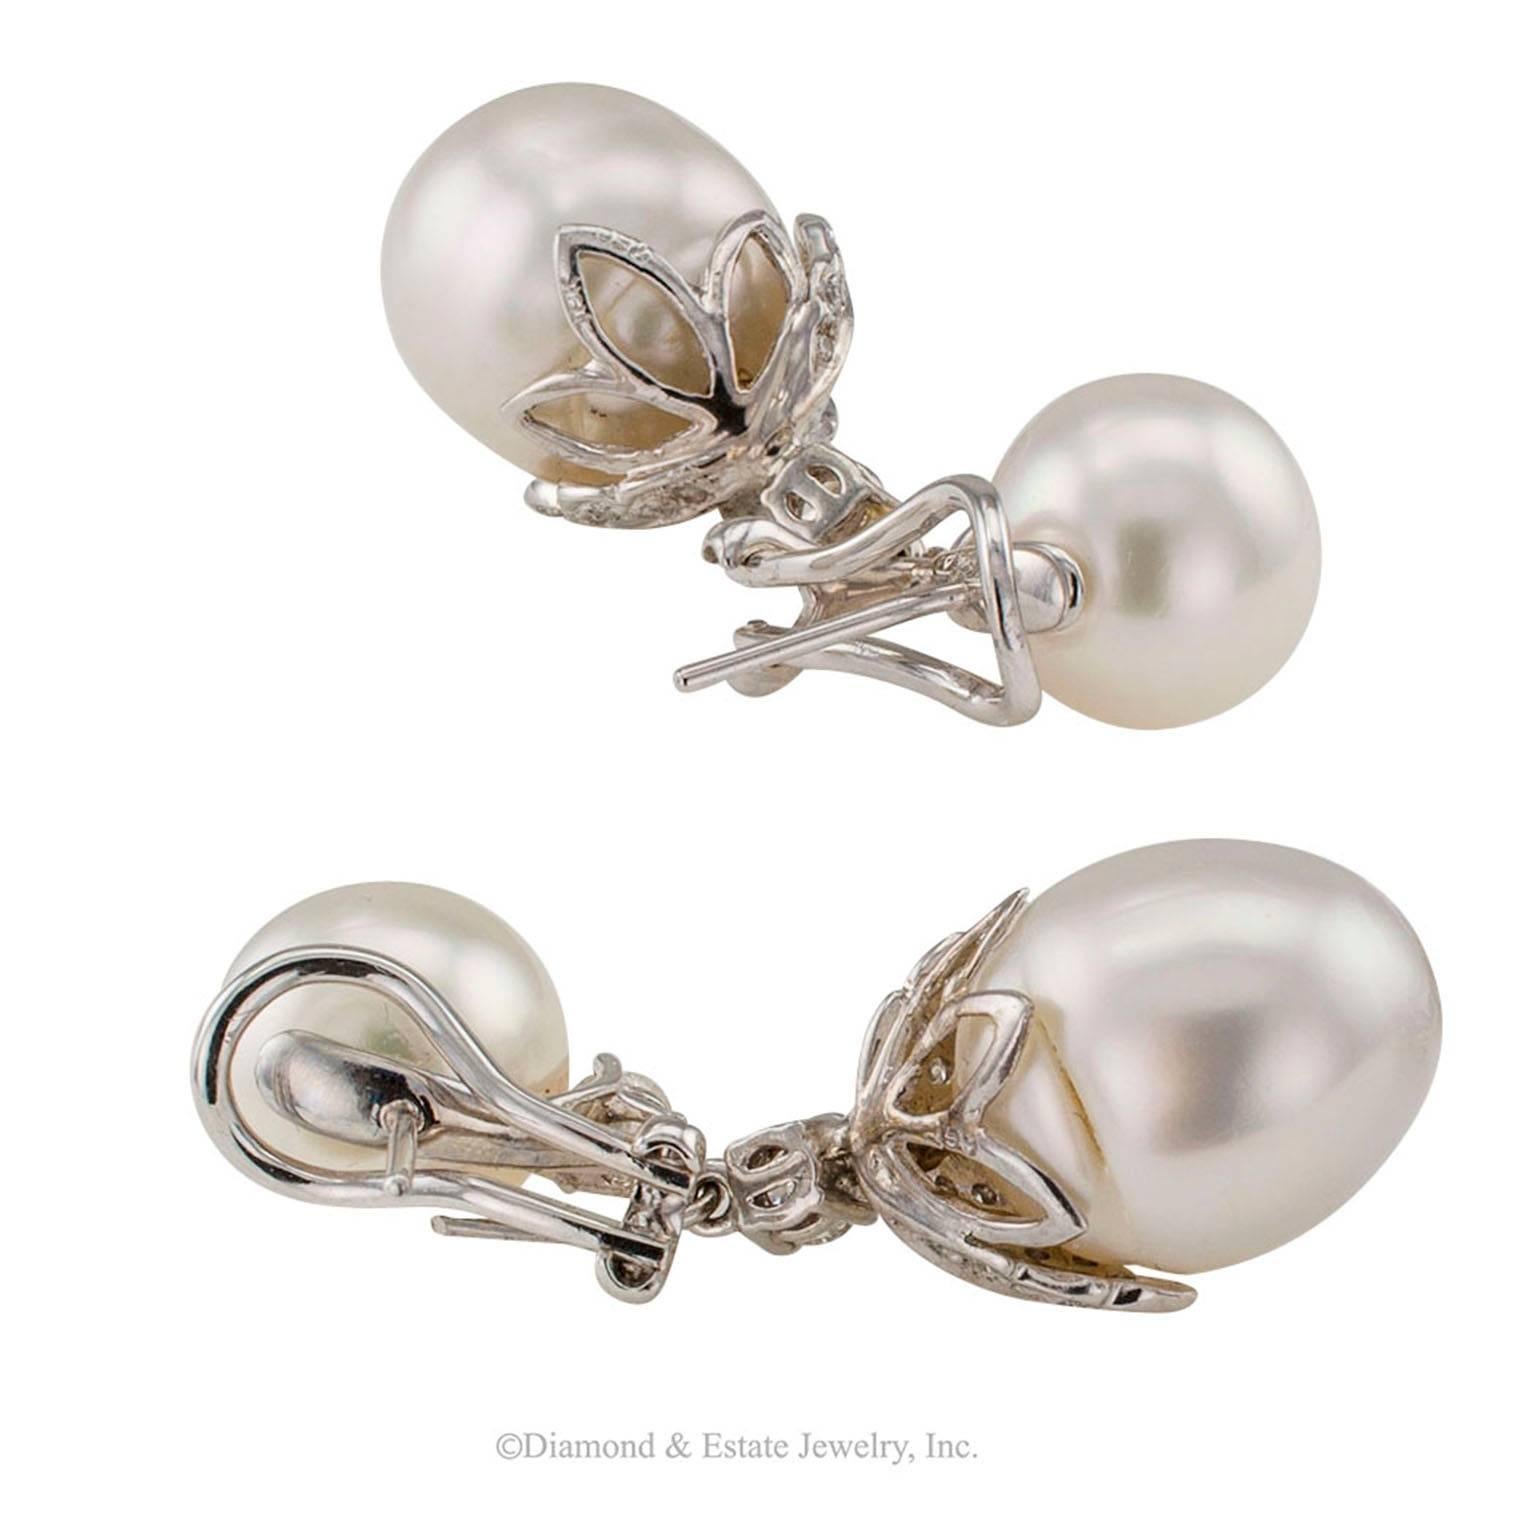 Contemporary Day into Night South Sea Pearl Diamond Gold Earrings